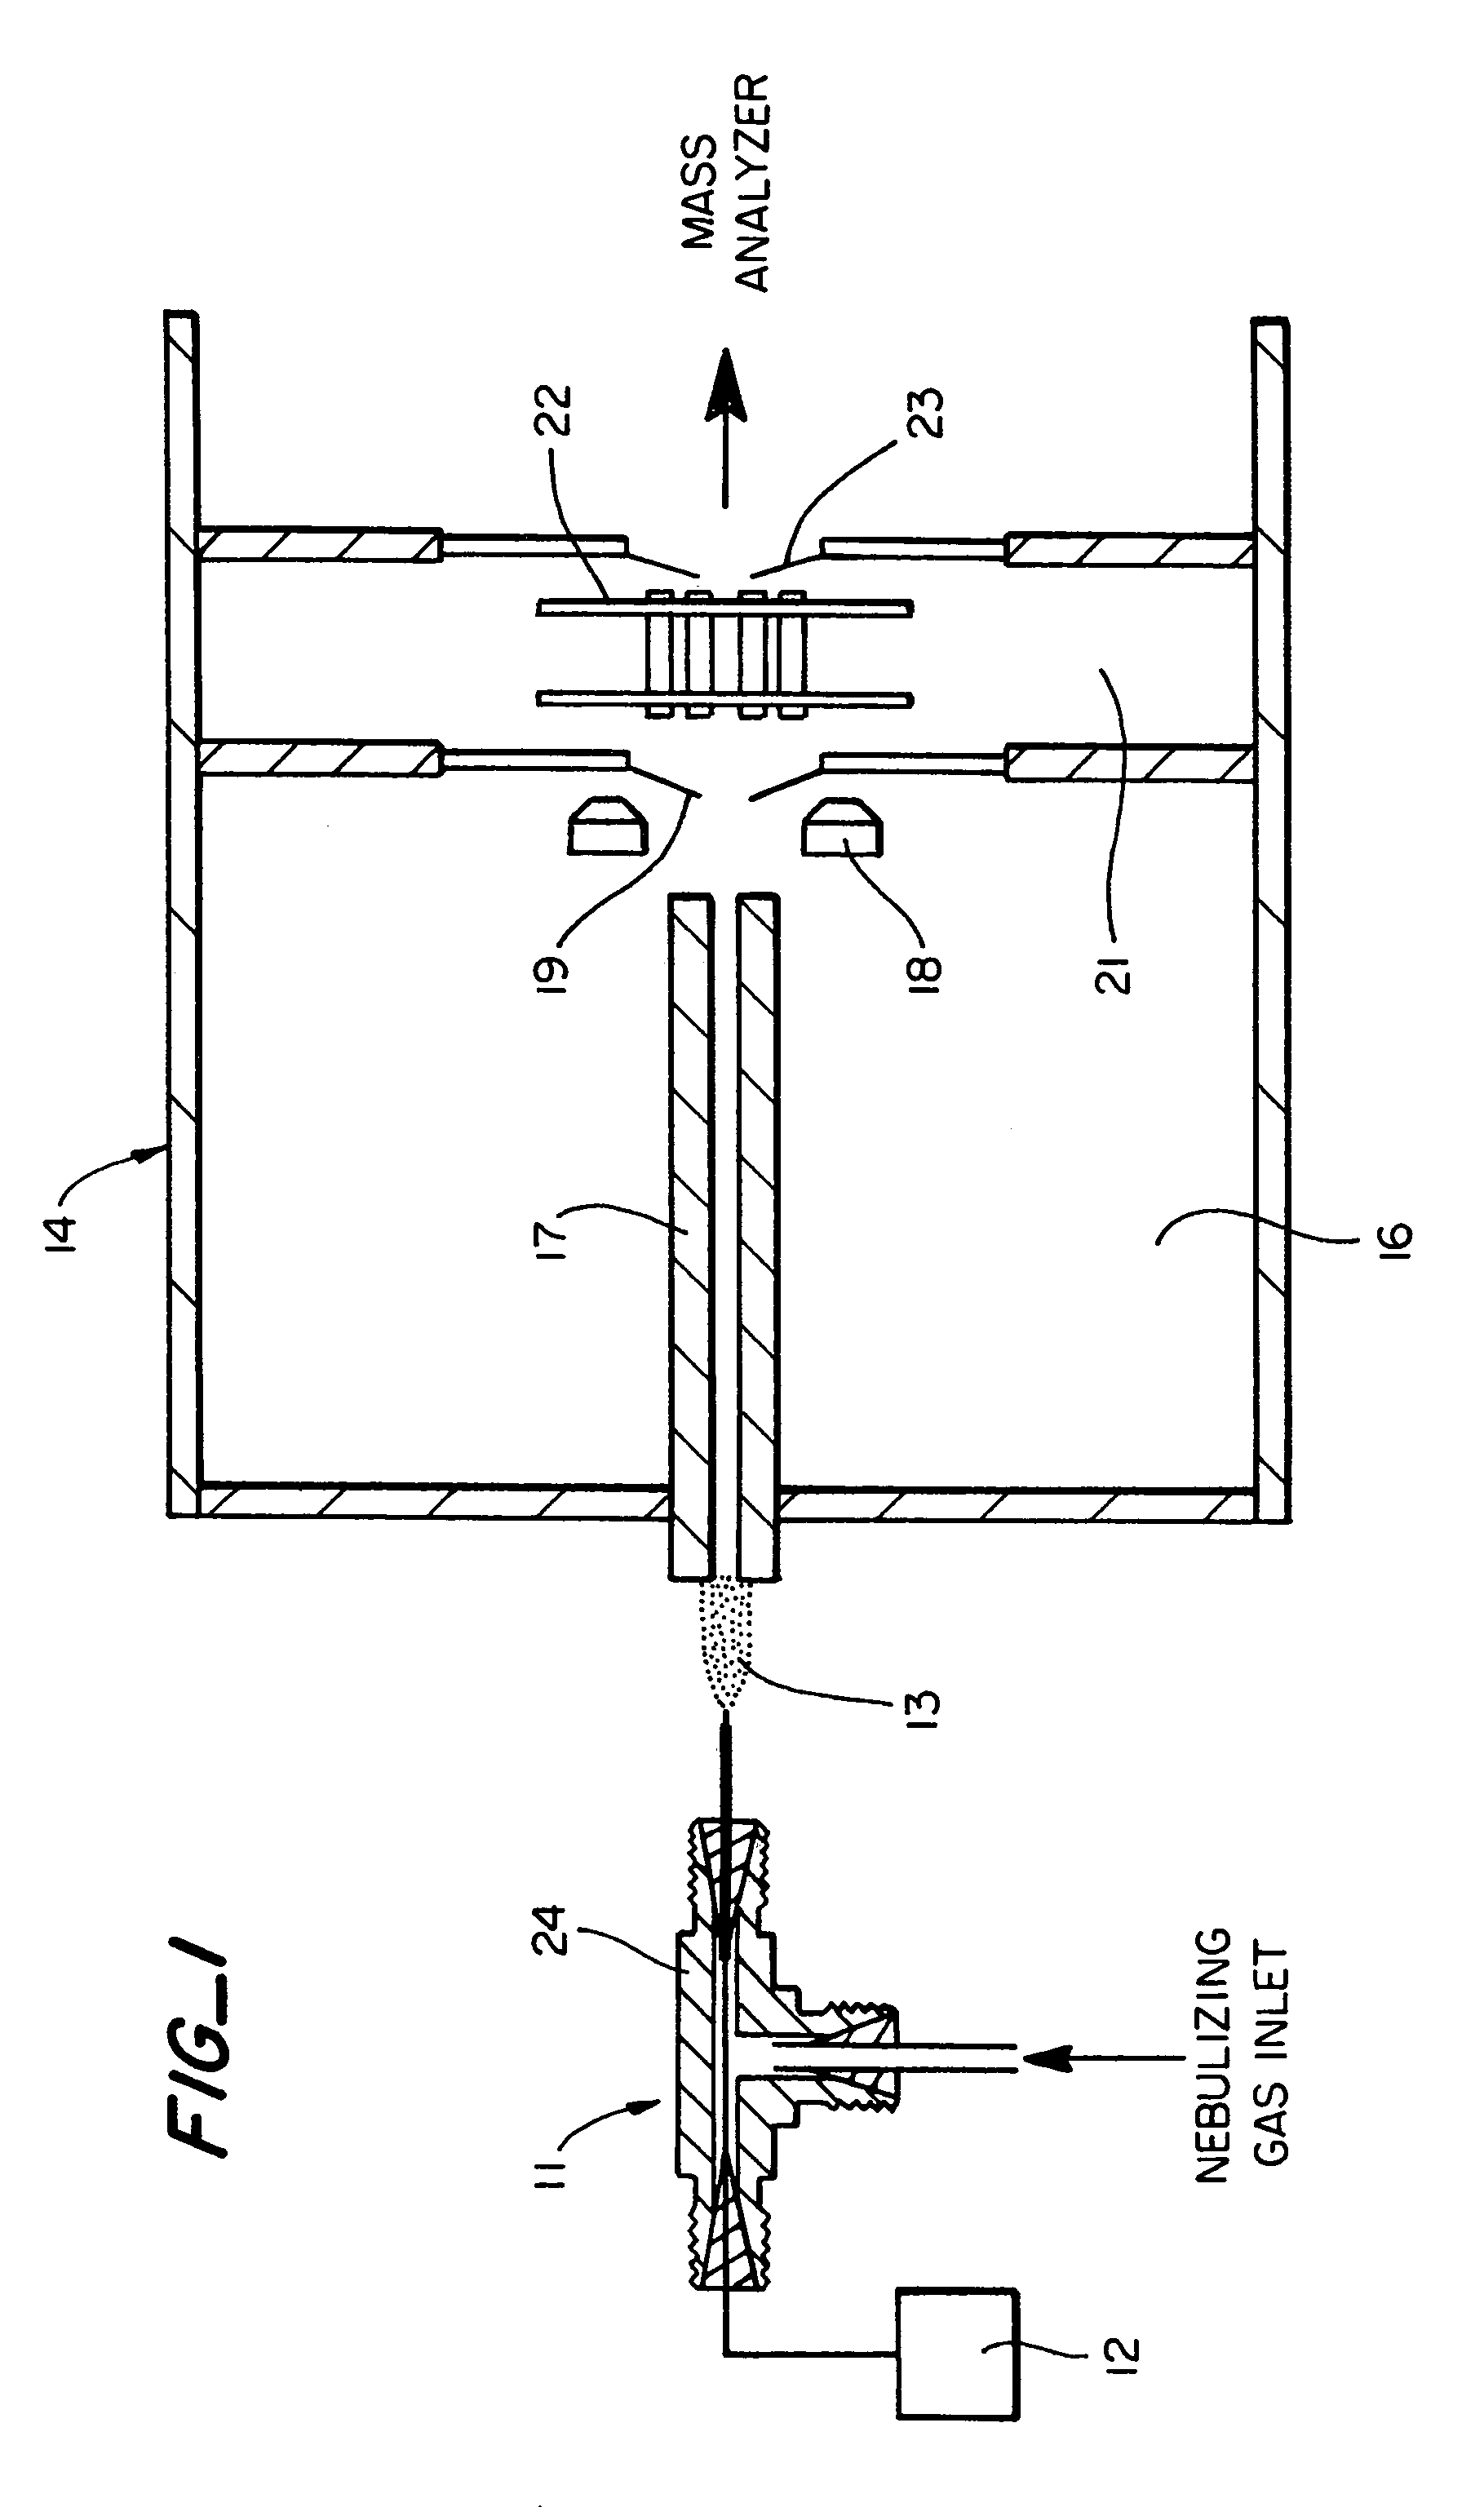 Electrosonic spray ionization method and device for the atmospheric ionization of molecules